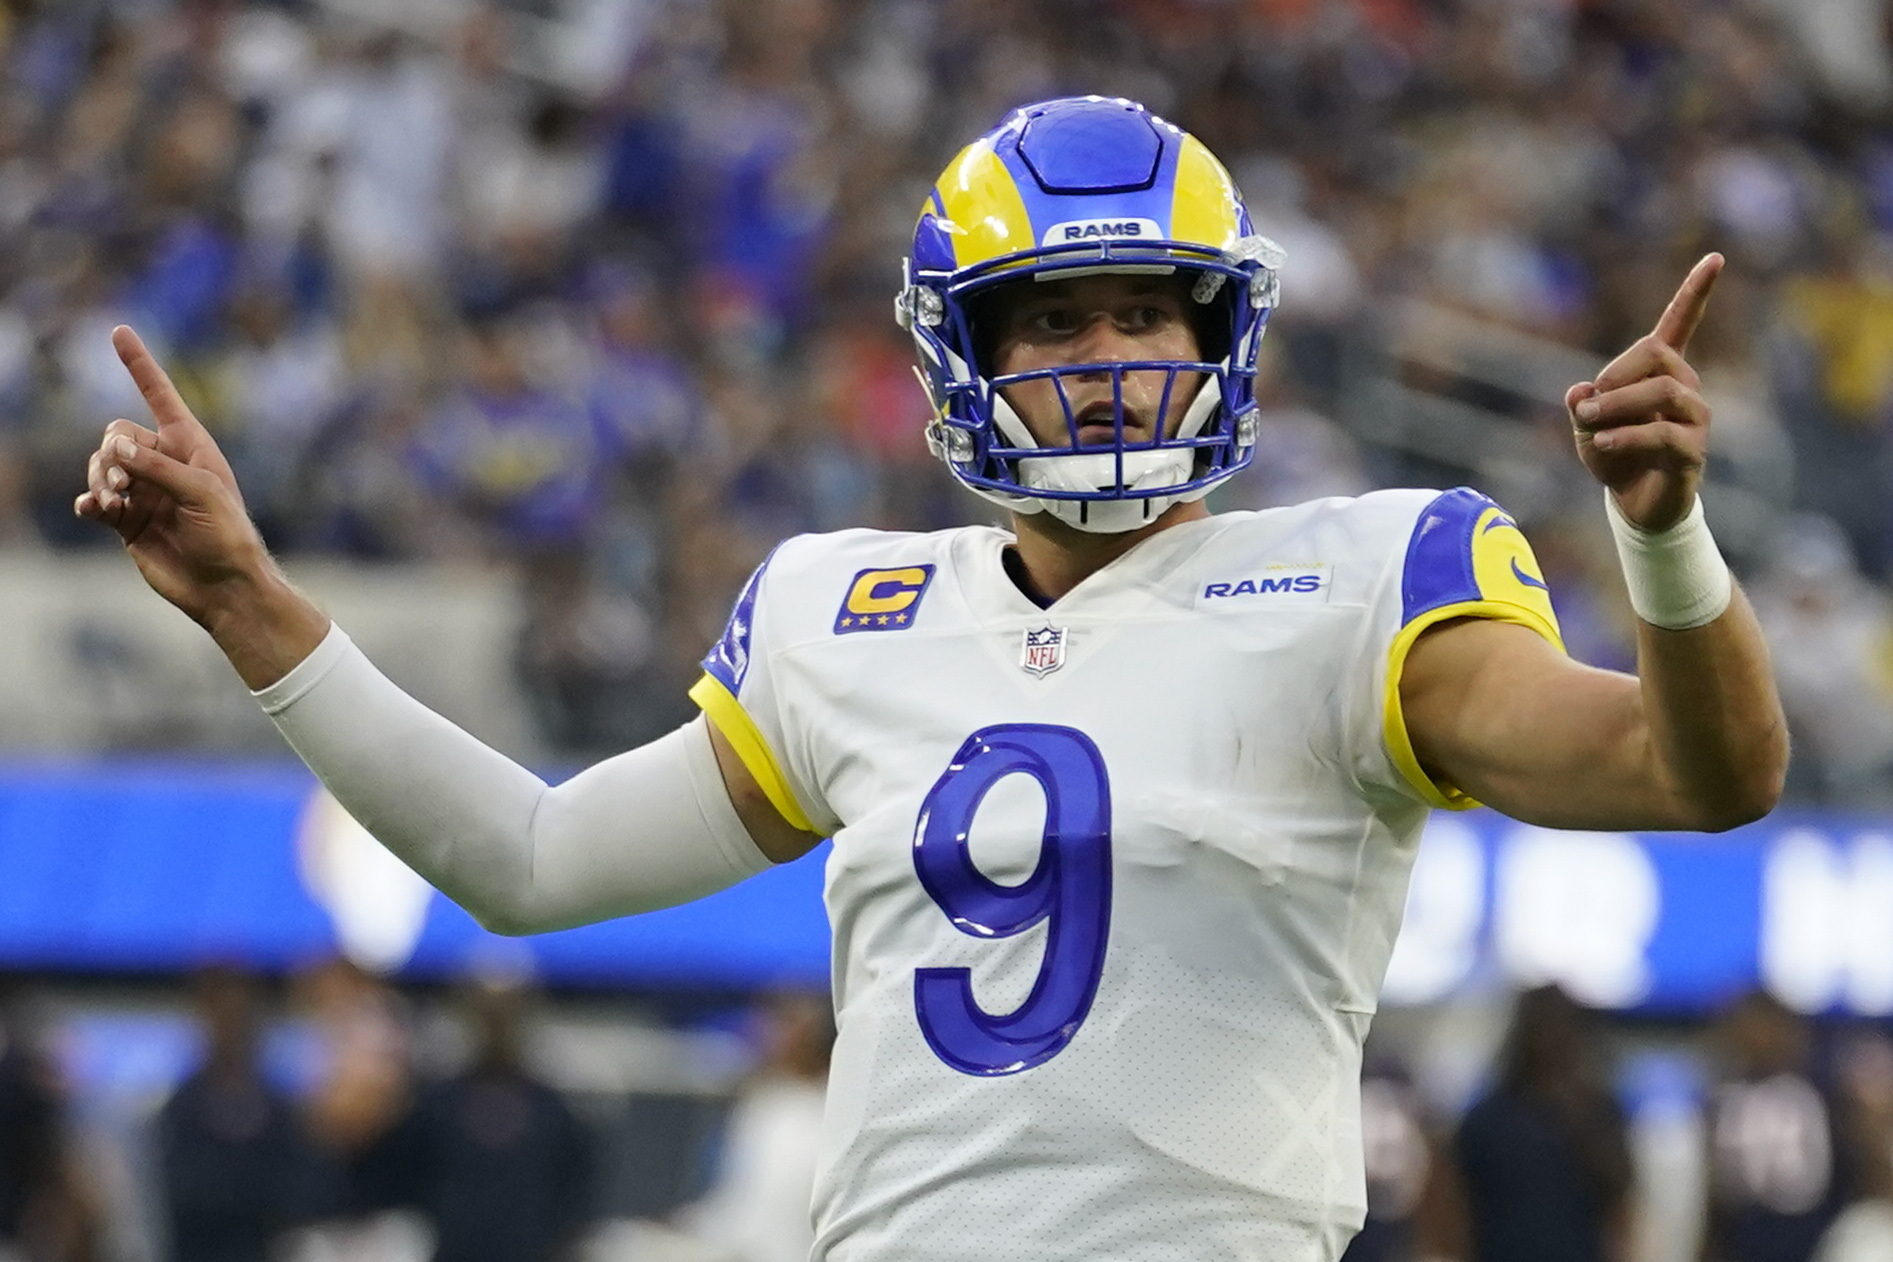 Former Lions' QB Matthew Stafford fired up to realize his Super Bowl dreams  – The Oakland Press